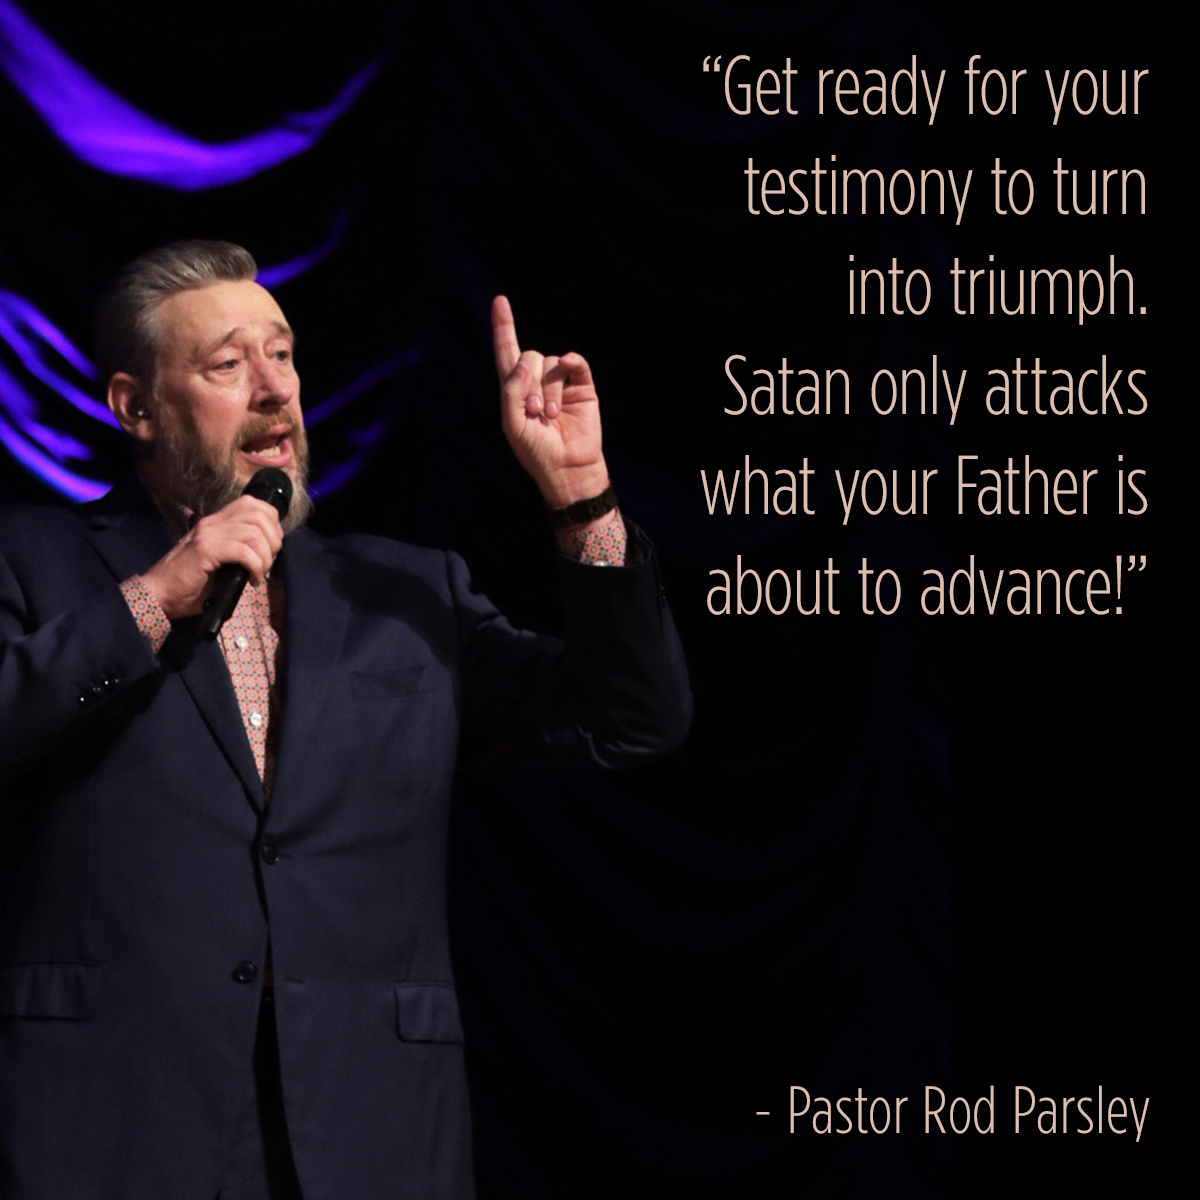 “Get ready for your testimony to turn into triumph. Satan only attacks what your Father is about to advance!” – Pastor Rod Parsley